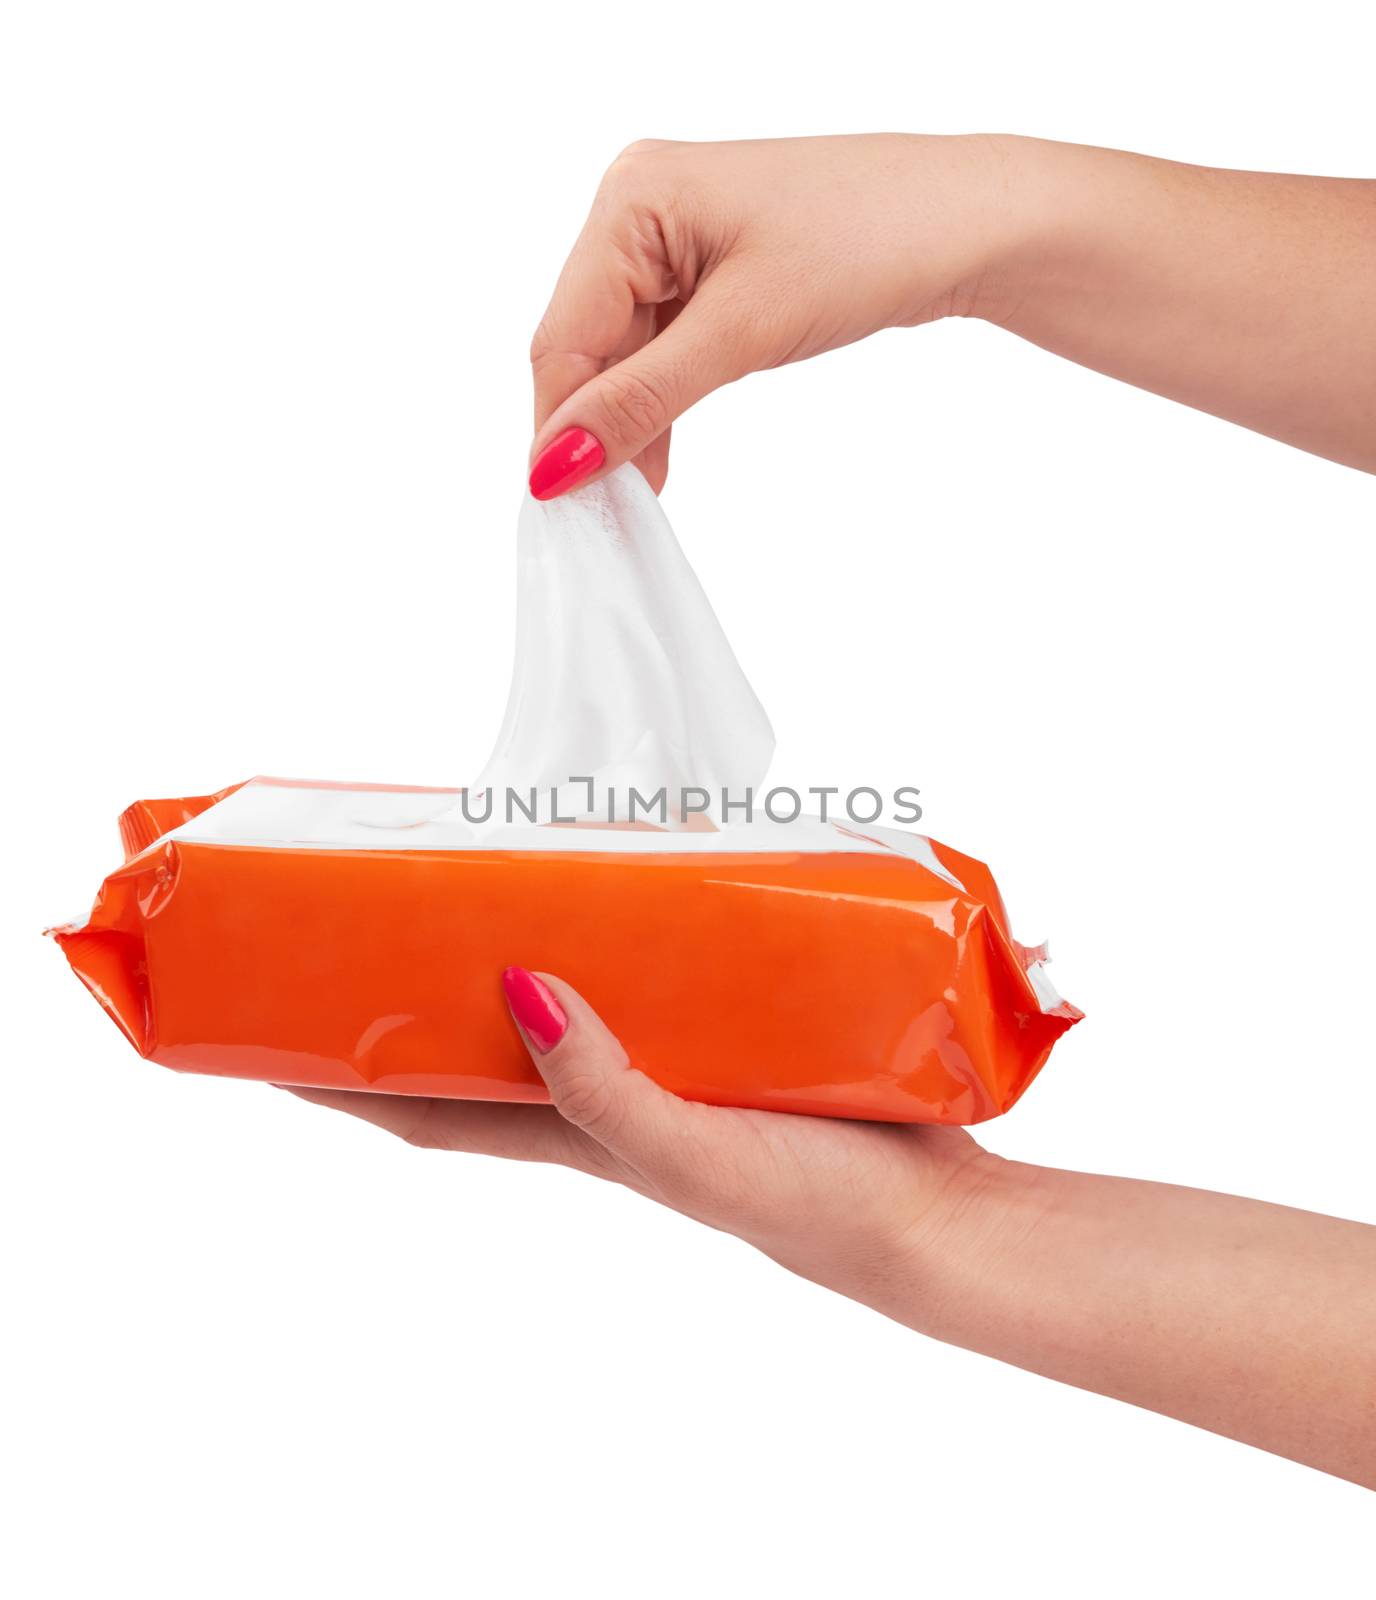 Tissue box isolated on a white background